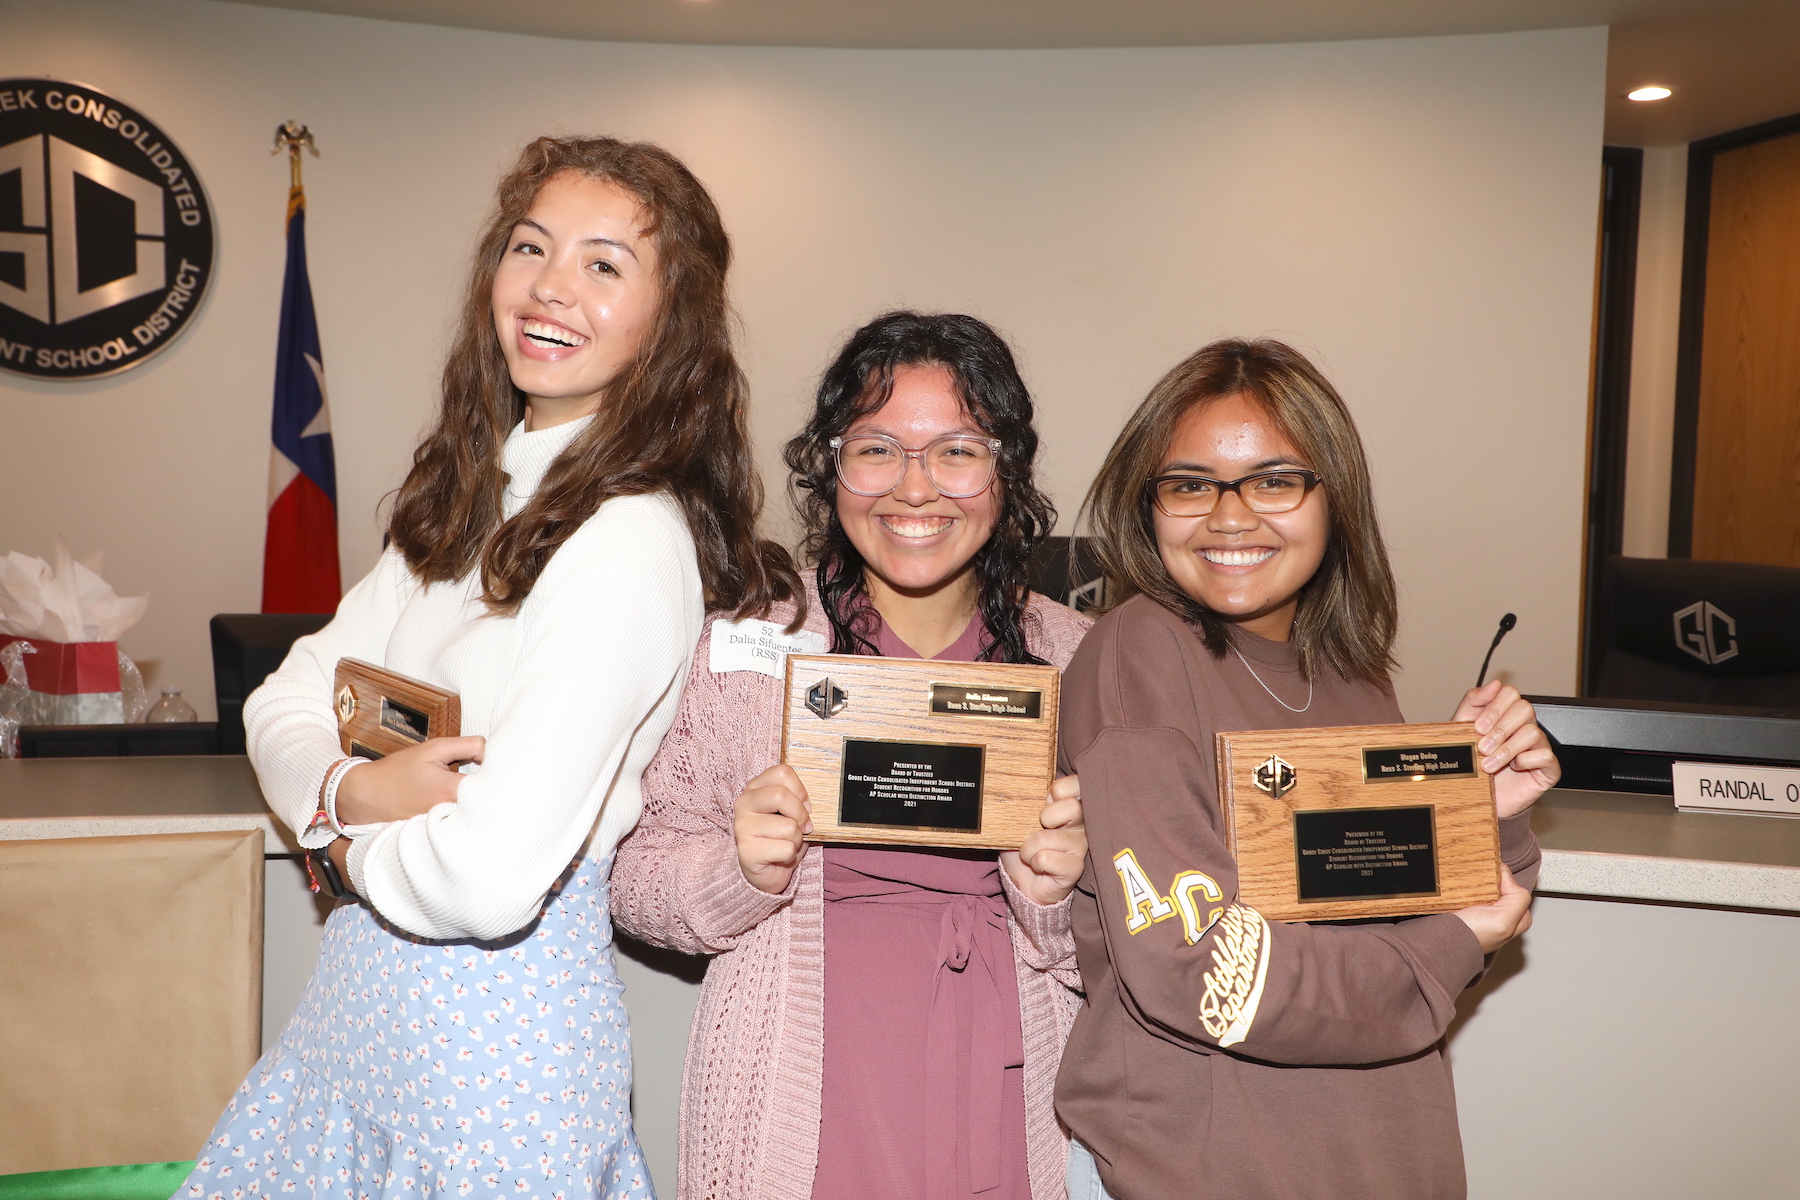 students pose with their award plaques